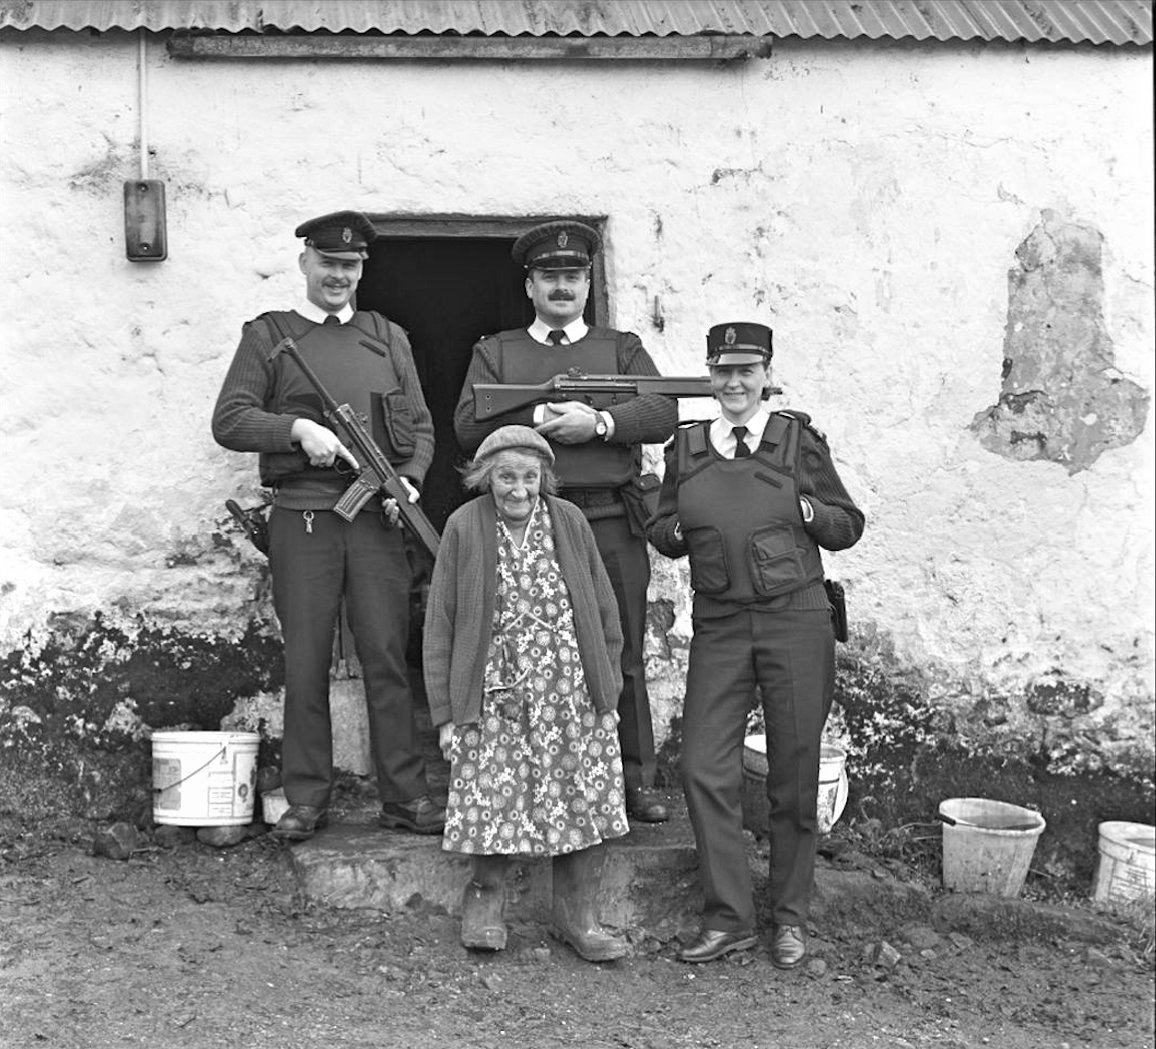 RUC officers from Clogher station with Sarah Primrose who lived on a farm off the beaten path in Mullaghfad, Co Tyrone. These officers kept an eye on her welfare especially in the winter. c2000. (courtesy of Bobbie Hanvey). facebook.com/Northern-Irela…